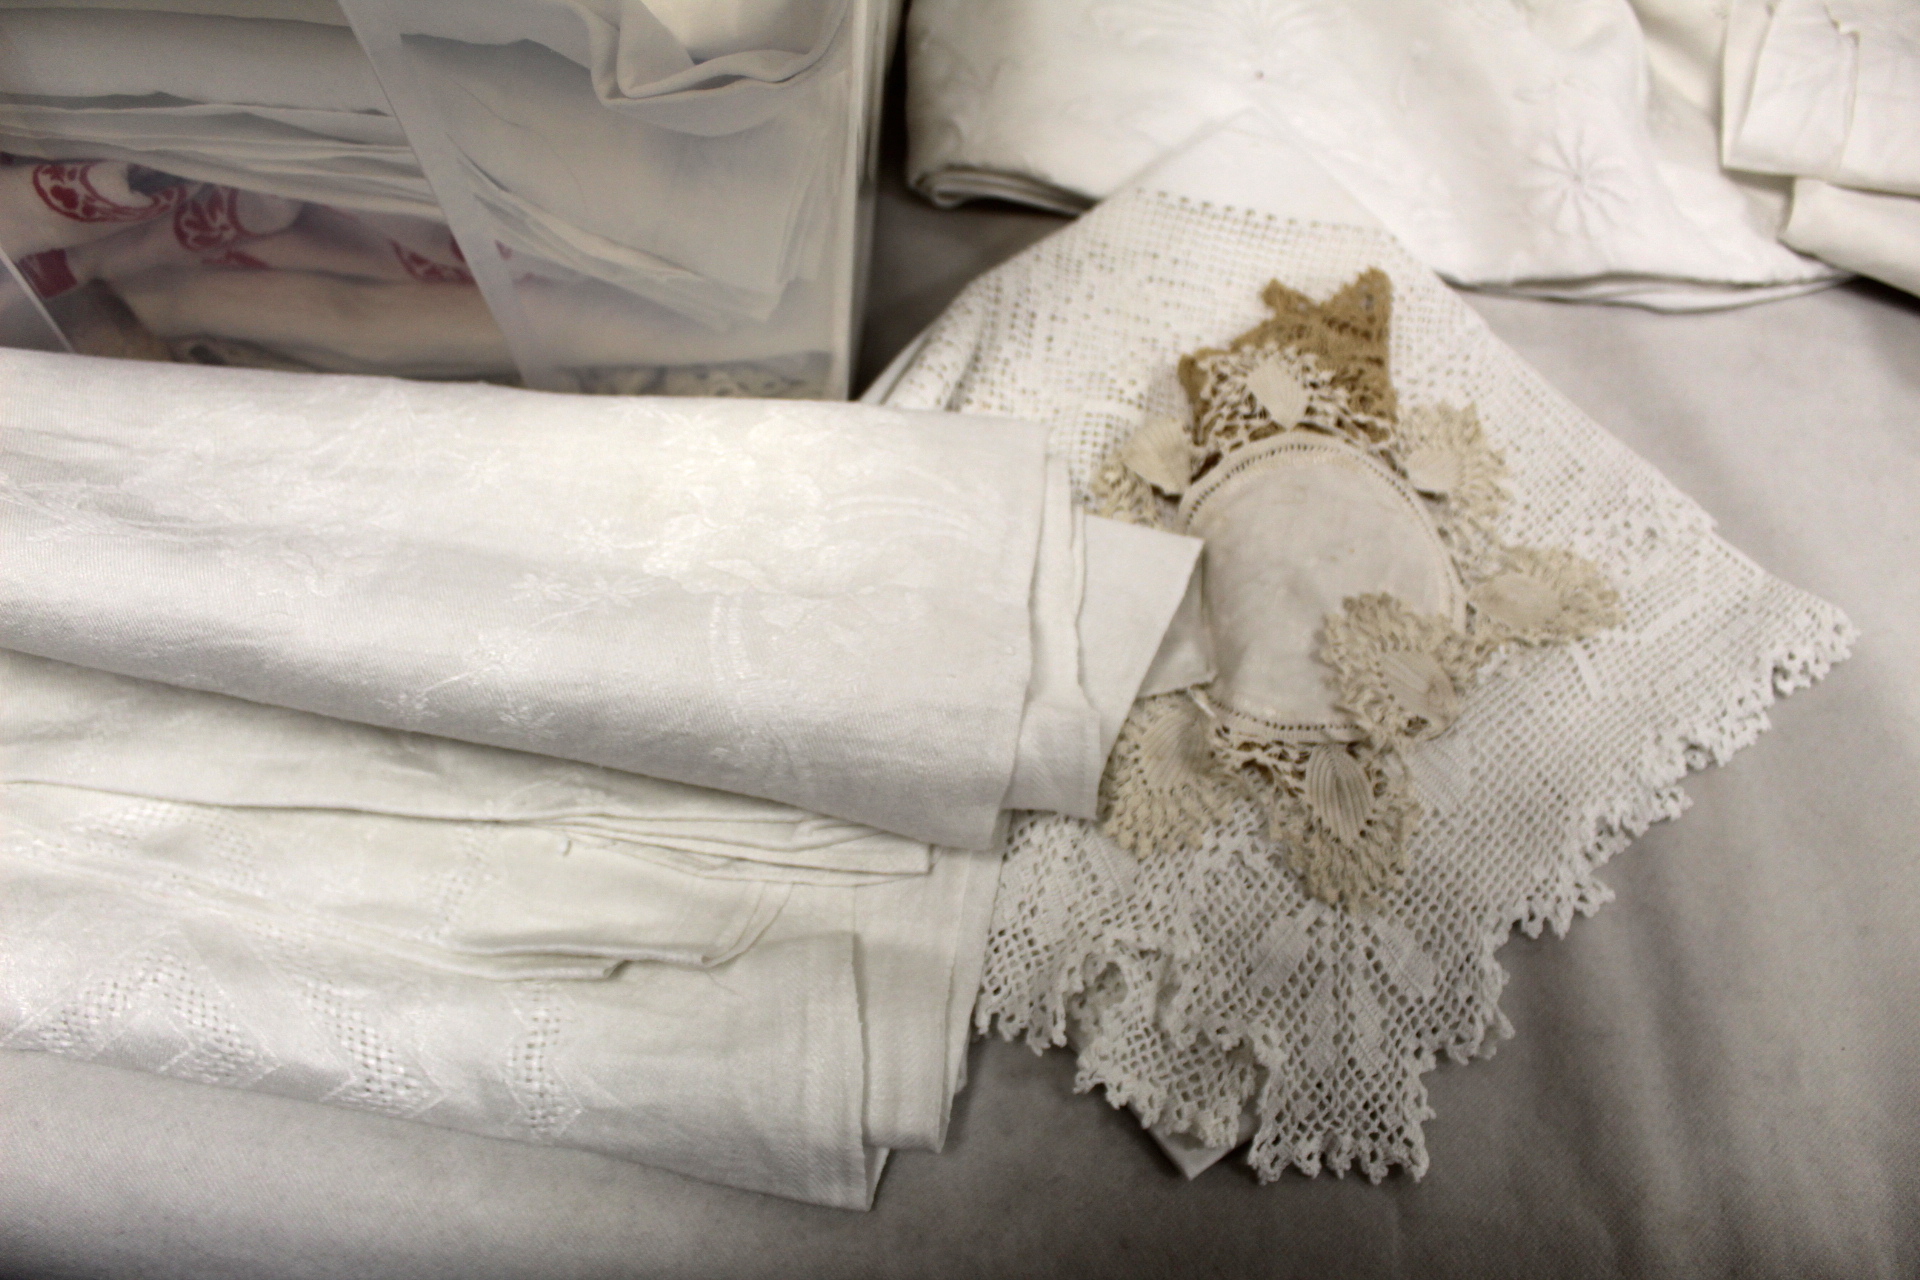 Box of table linen and bed linen including embroidered, cut work and damask tablecloths, sheets, - Image 6 of 7